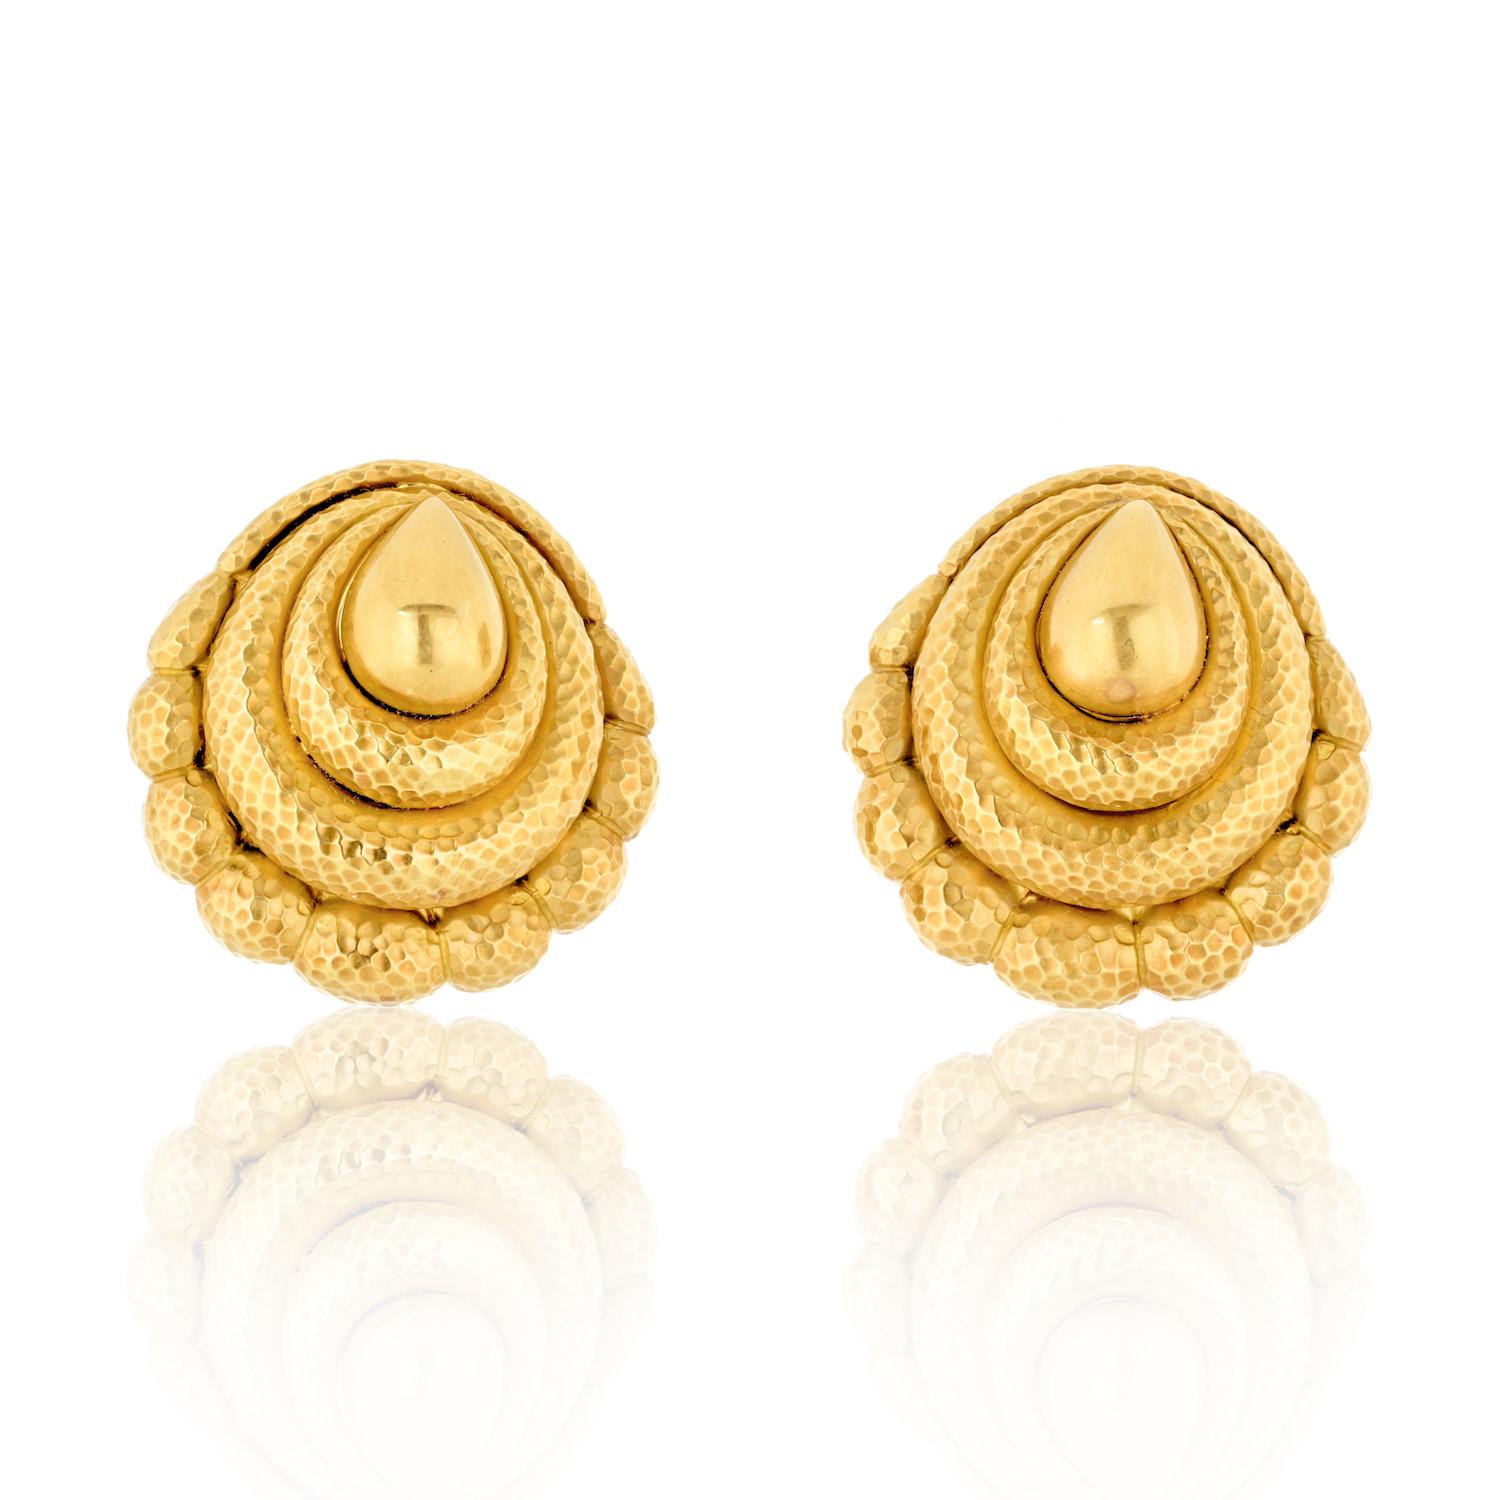 Step into the world of vintage elegance with the David Webb 18K Yellow Gold Hammered Scroll Earrings, a pair of timeless accessories that showcase the brand's signature craftsmanship and design.

**Key Features:**

1. **Material:**
   - Crafted in